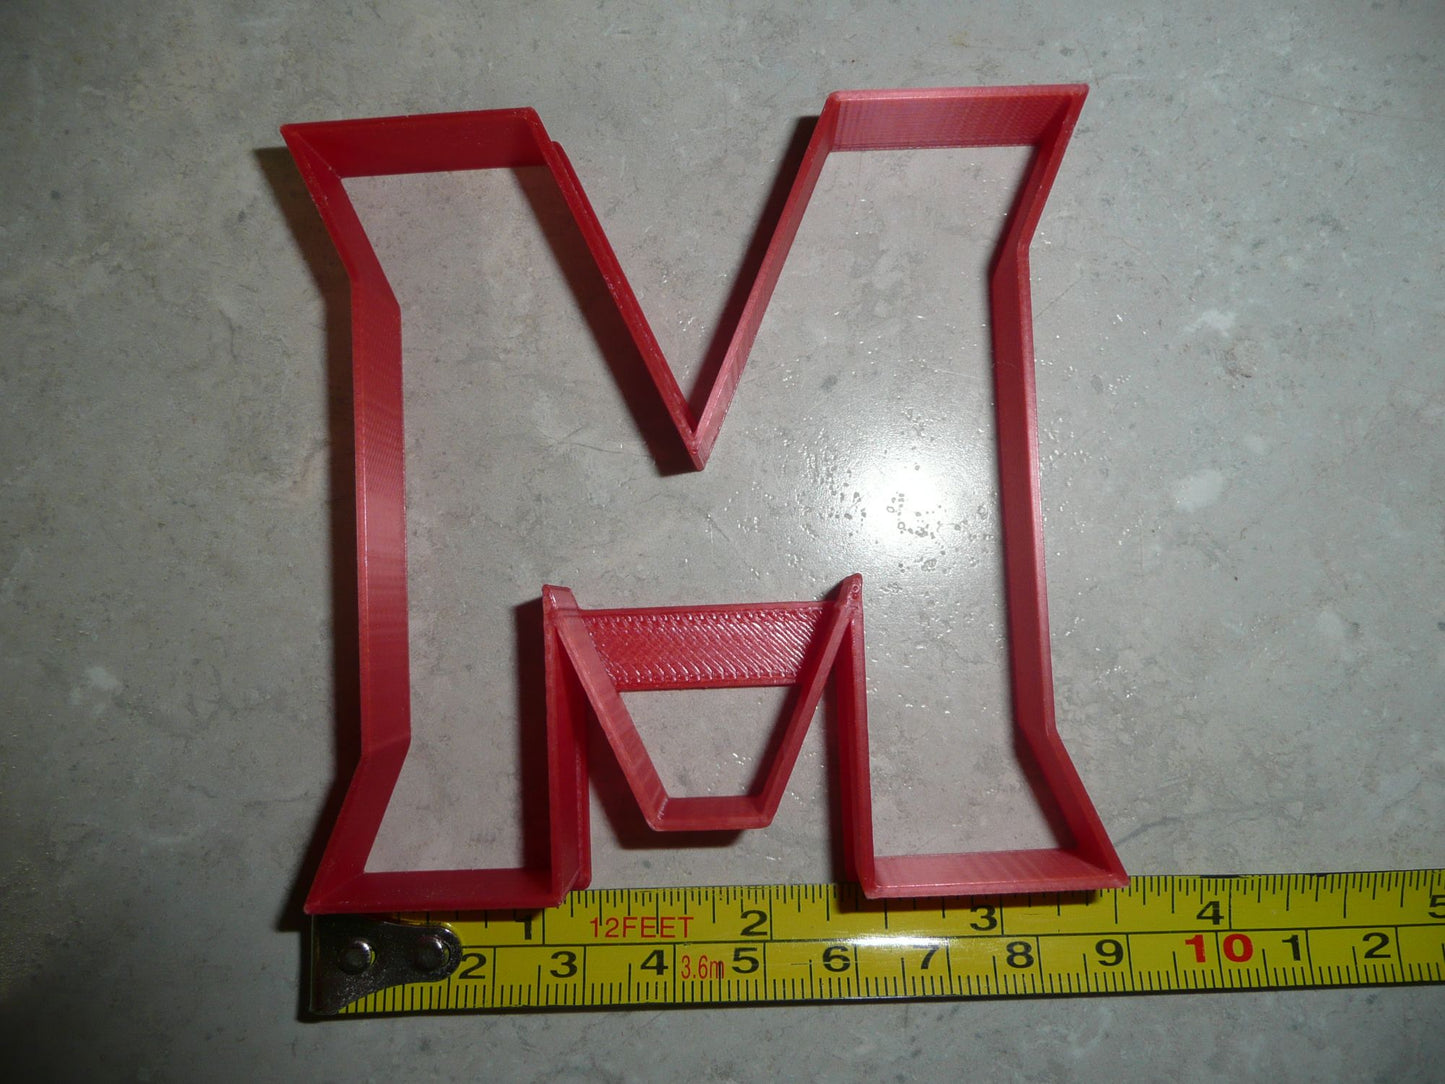 University of Maryland Terps Terrapins M Letter Logo Cookie Cutter USA PR2936